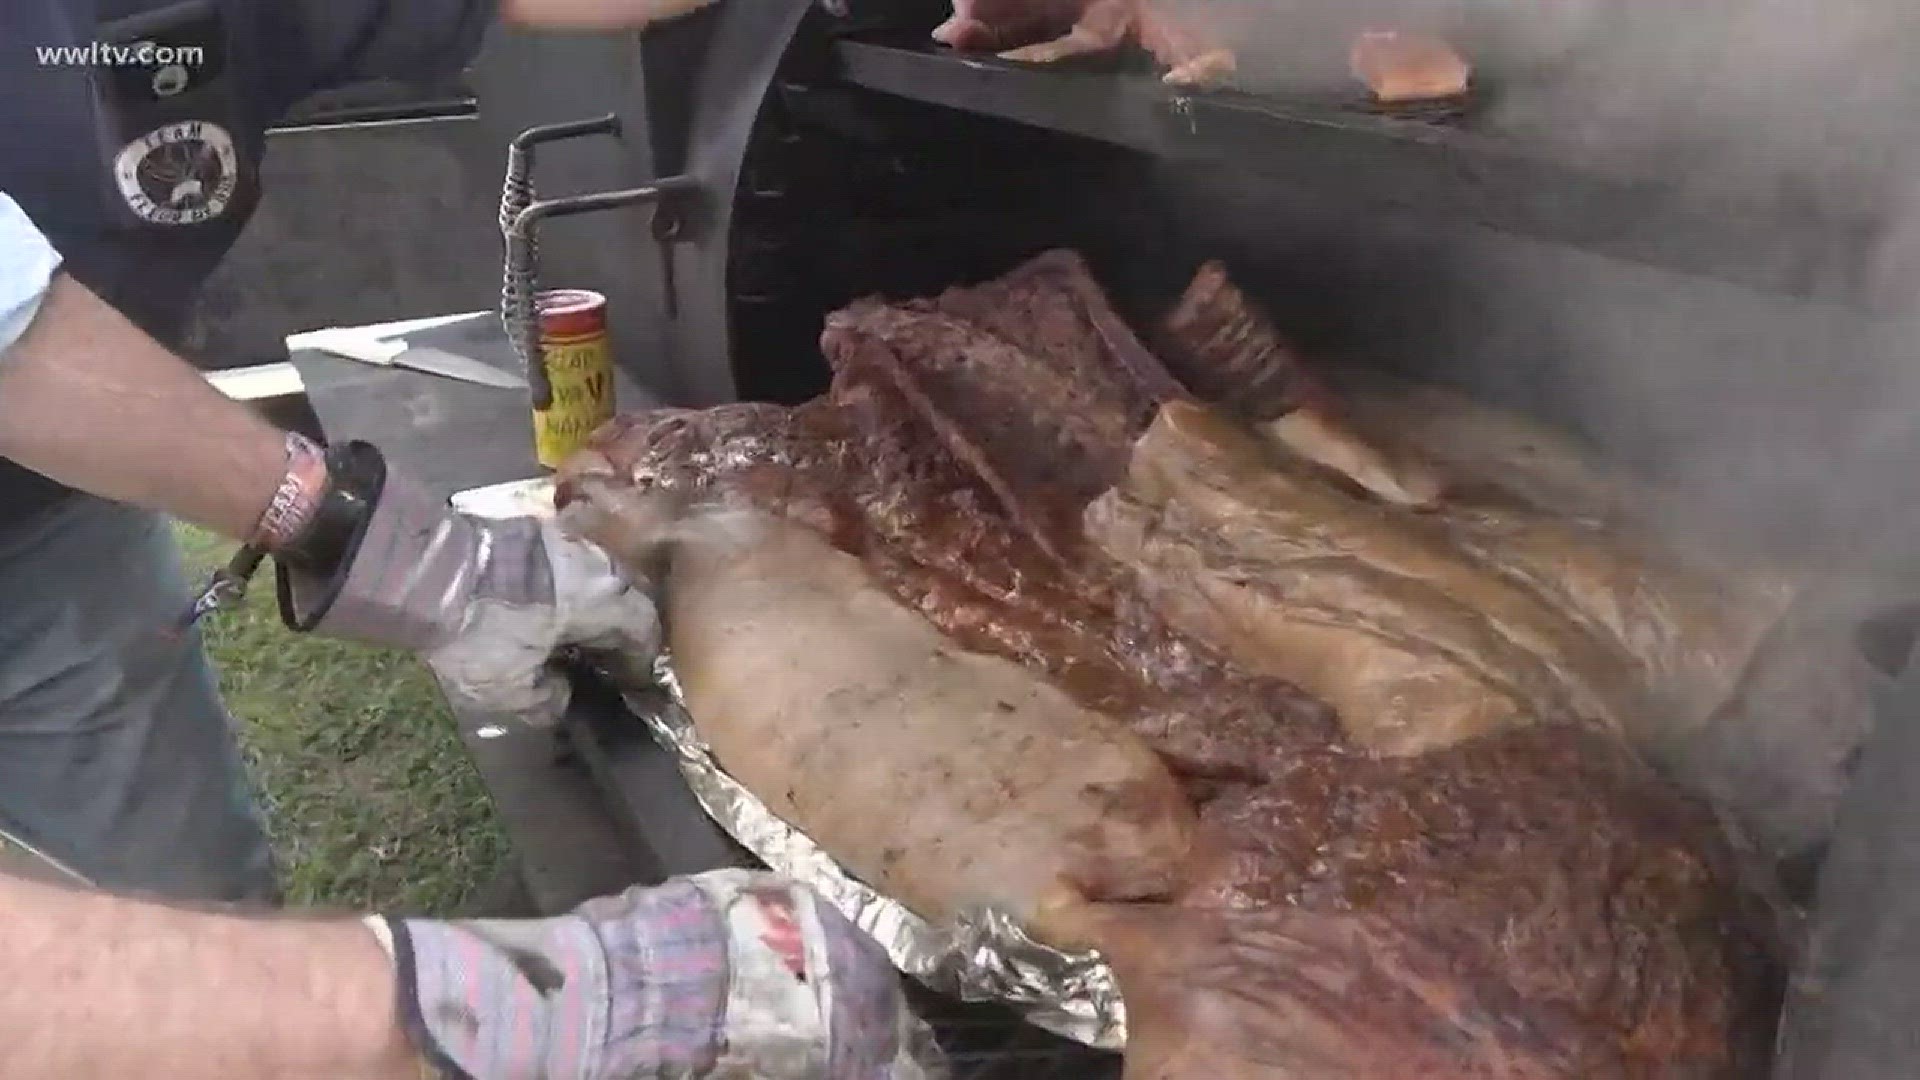 Thousands will make their way to UNO's Lakefront Arena Field this weekend for Hogs for the Cause. More than 80 teams are competing, offering their best version of pork.